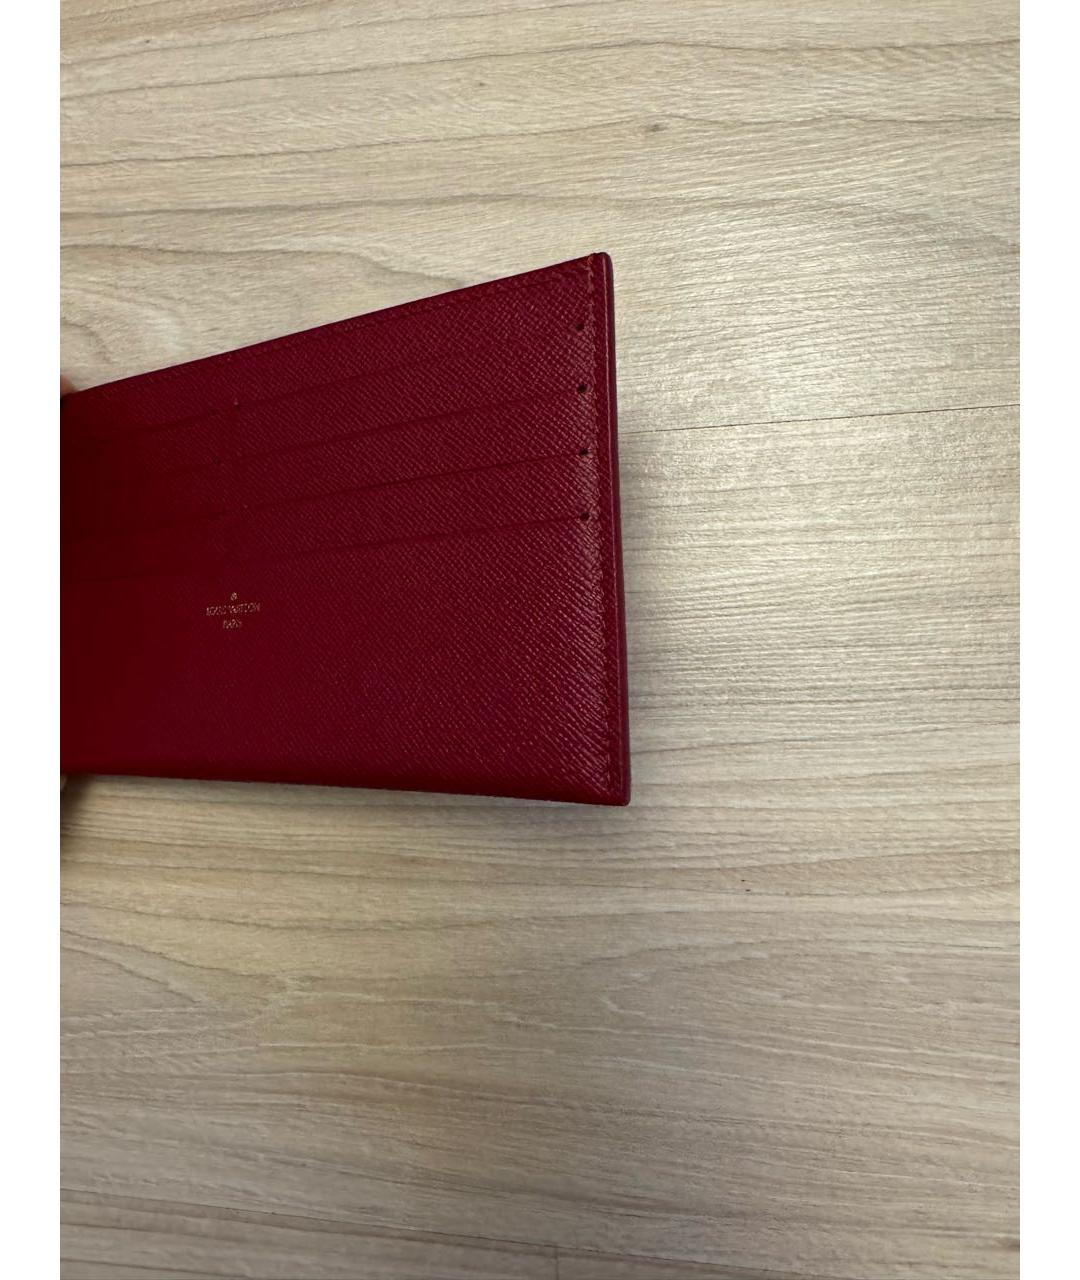 LOUIS VUITTON PRE-OWNED Кожаный кардхолдер, фото 6